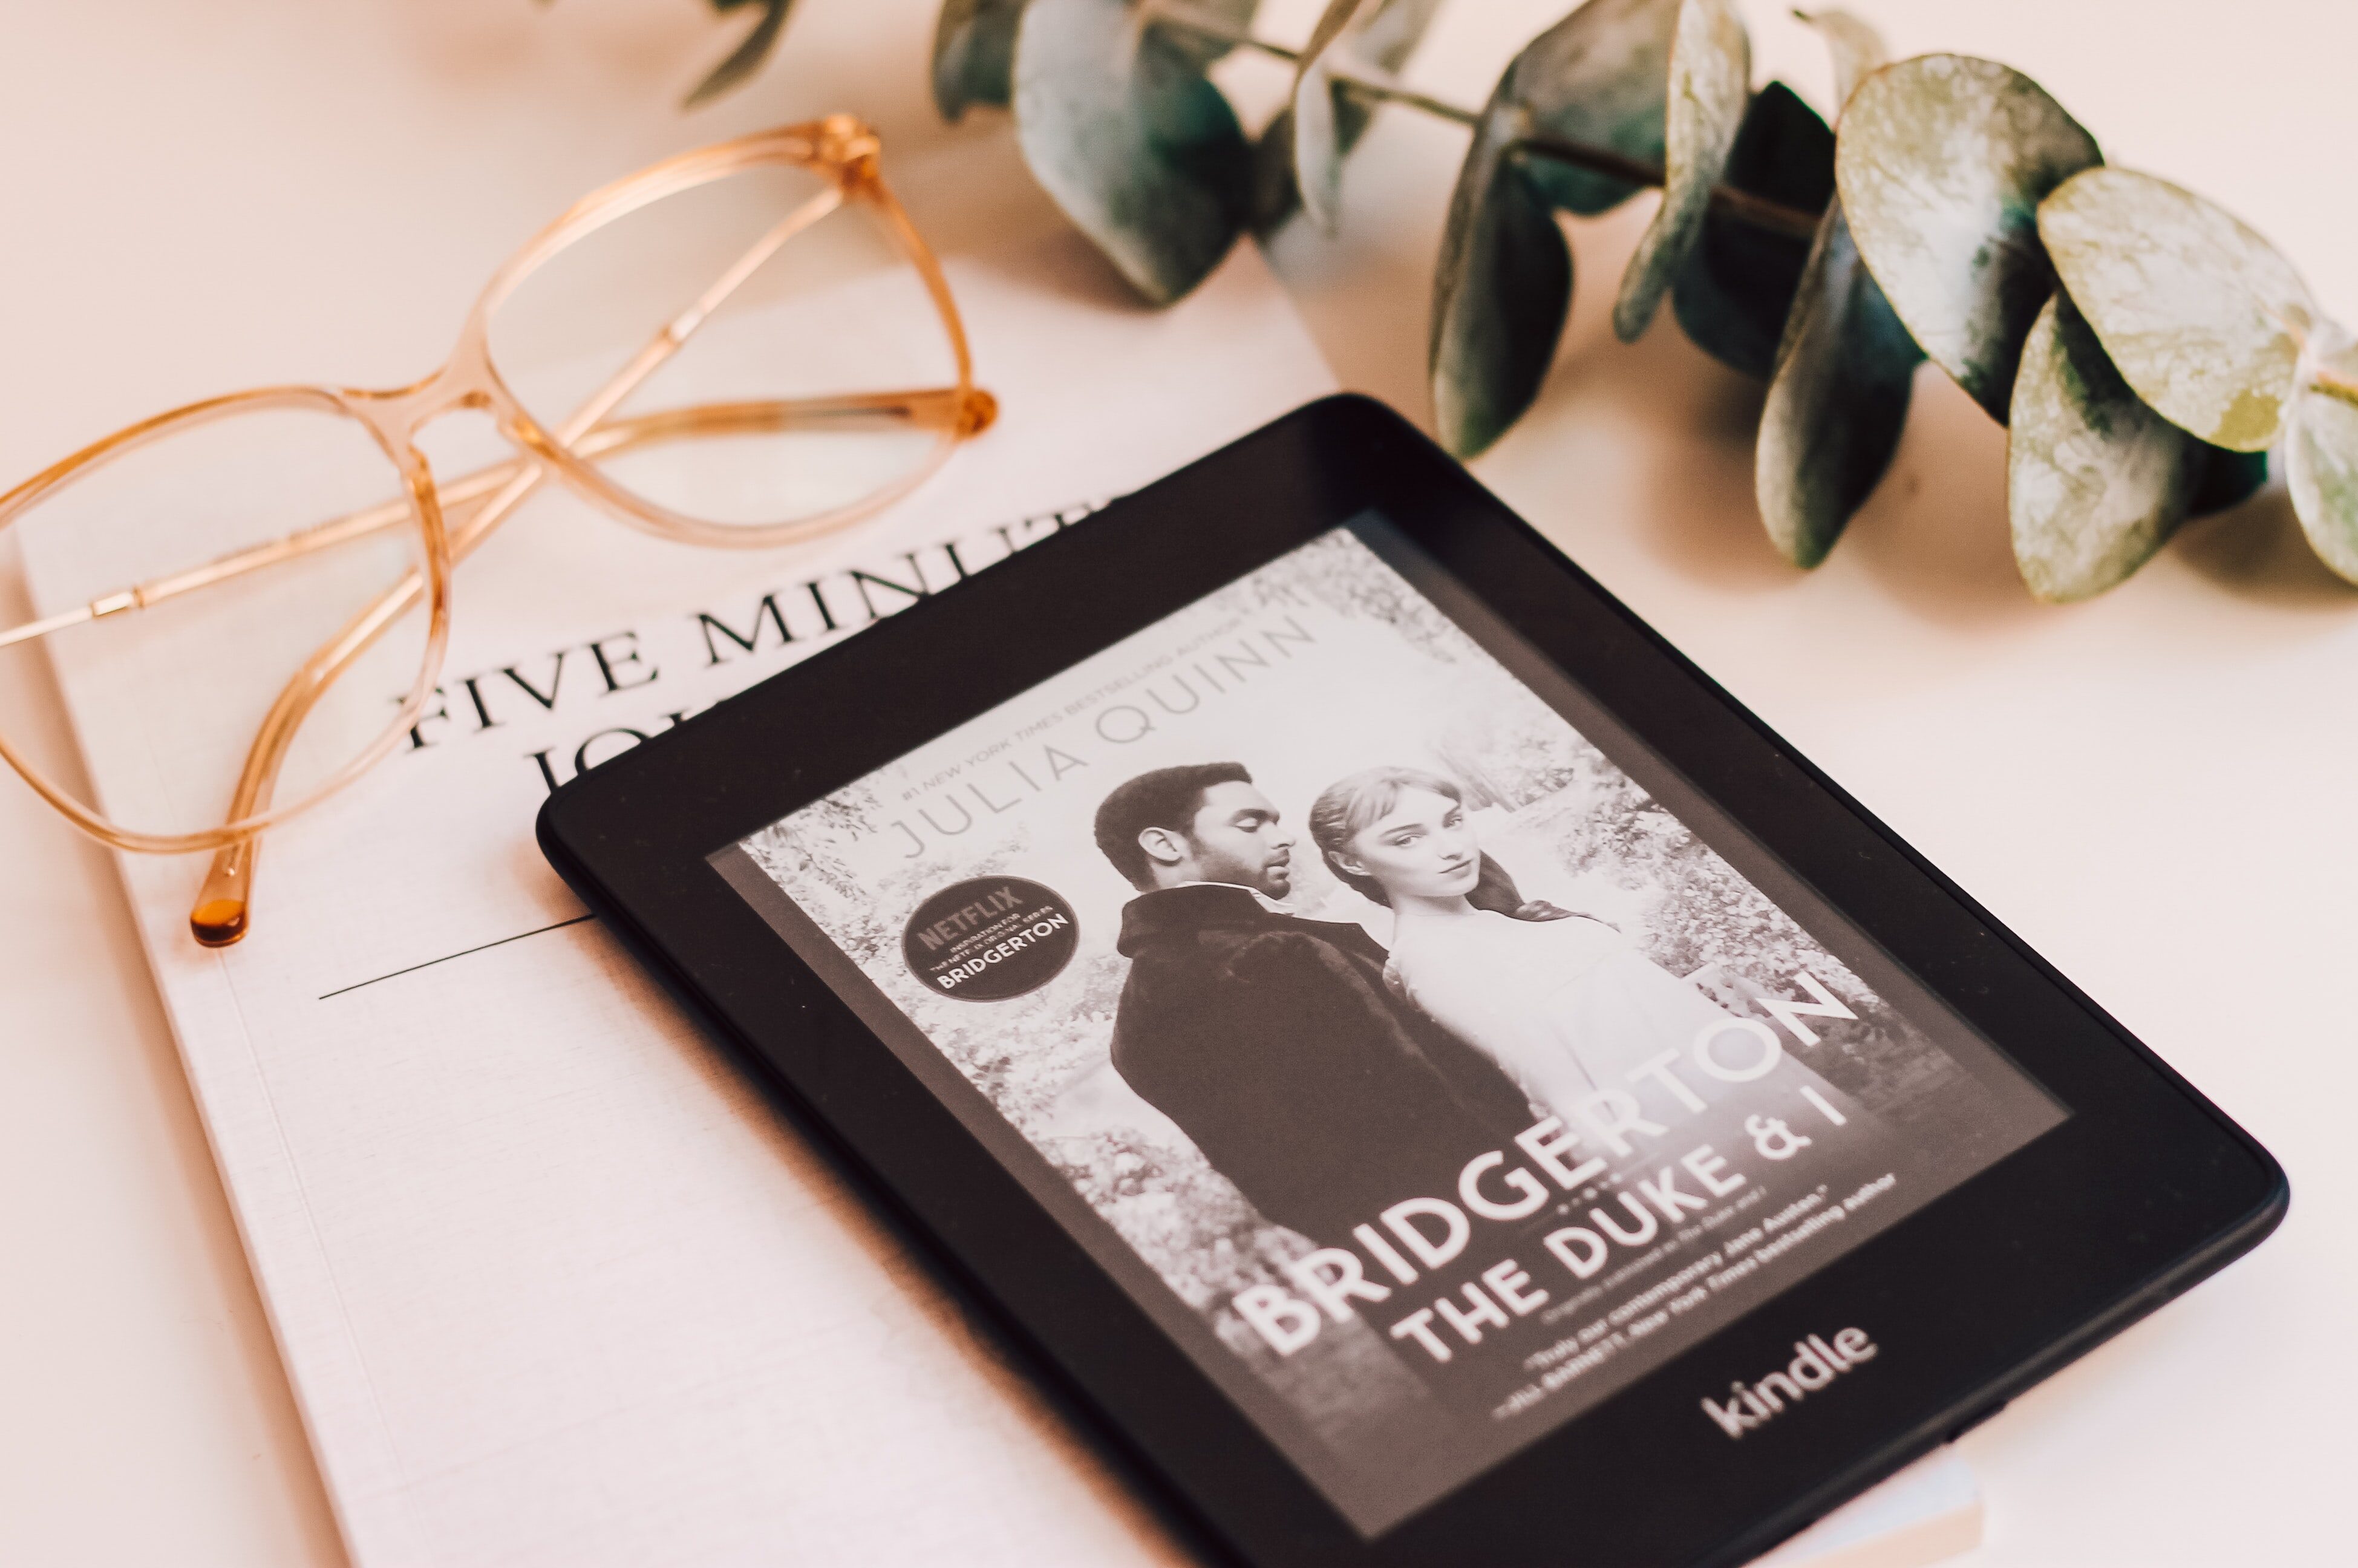 Want to try Kindle Unlimited? Get a 3-month free trial now for